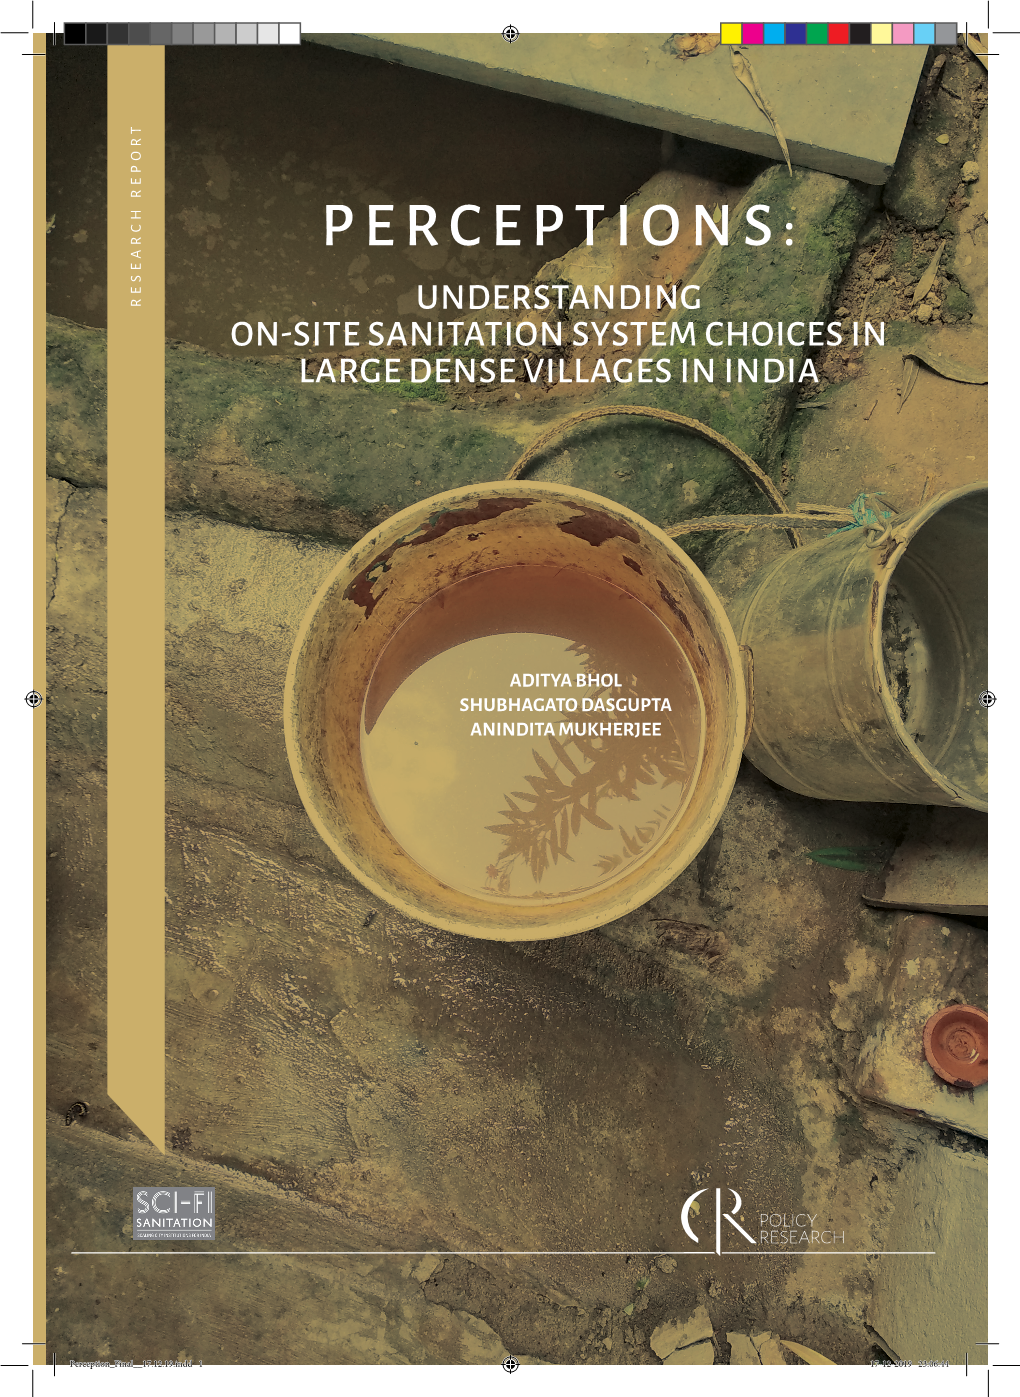 PERCEPTIONS: Understanding On-Site Sanitation System Choices in Large Dense Villages in India